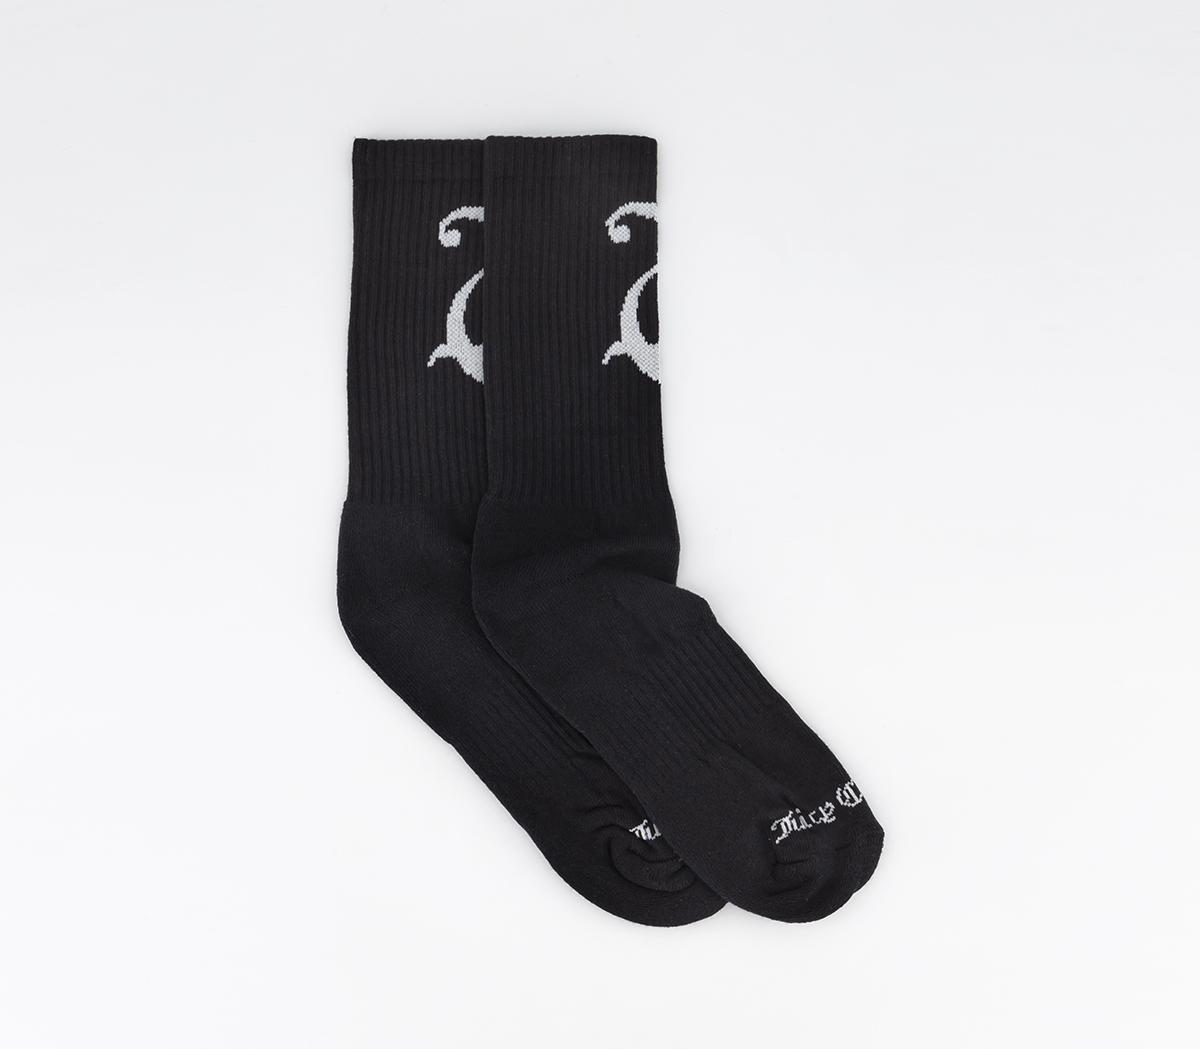 Juicy Couture Louie Socks Black, One Size